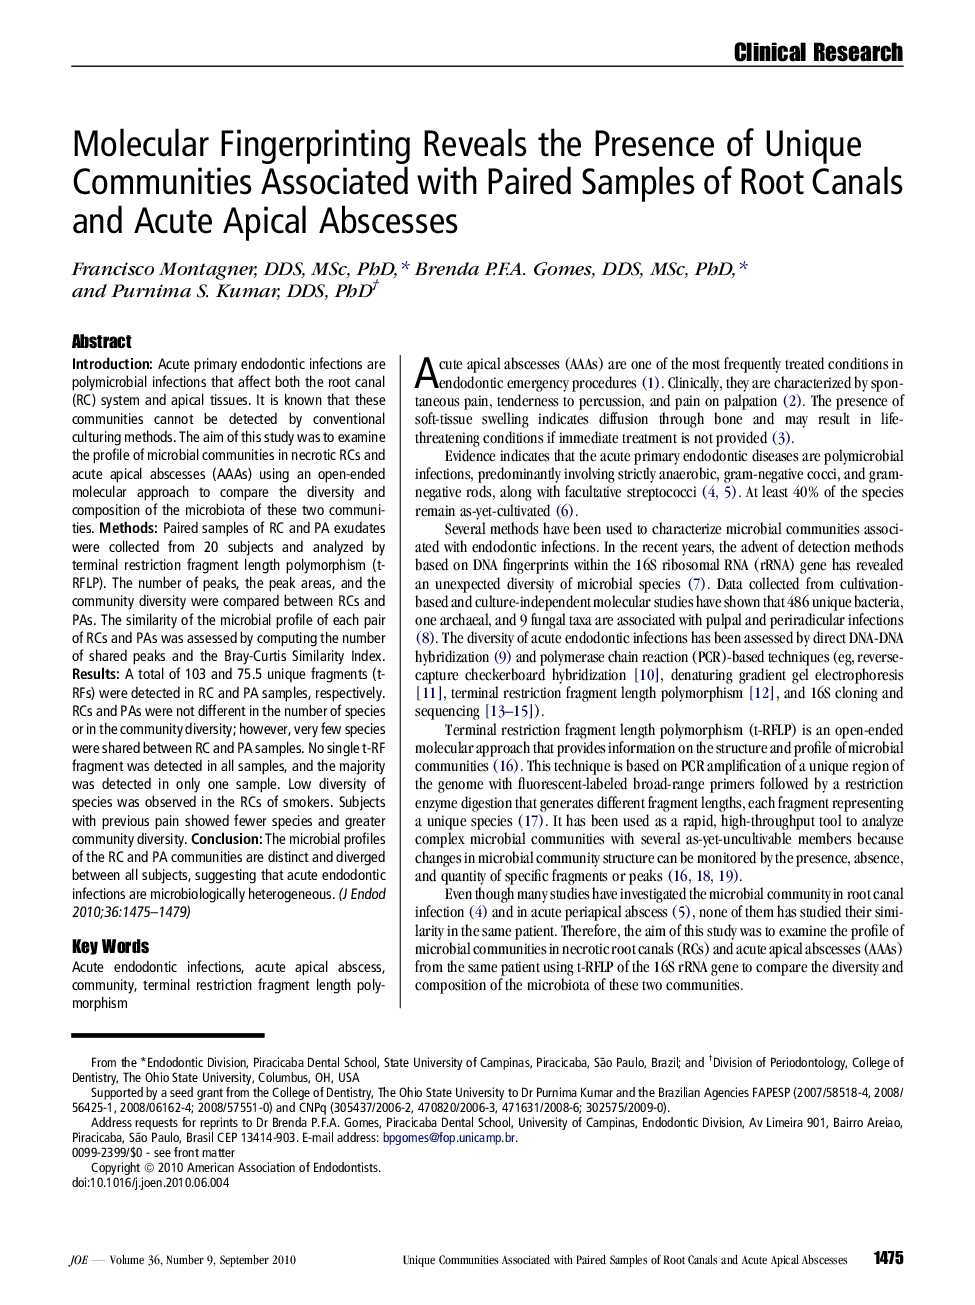 Molecular Fingerprinting Reveals the Presence of Unique Communities Associated with Paired Samples of Root Canals and Acute Apical Abscesses